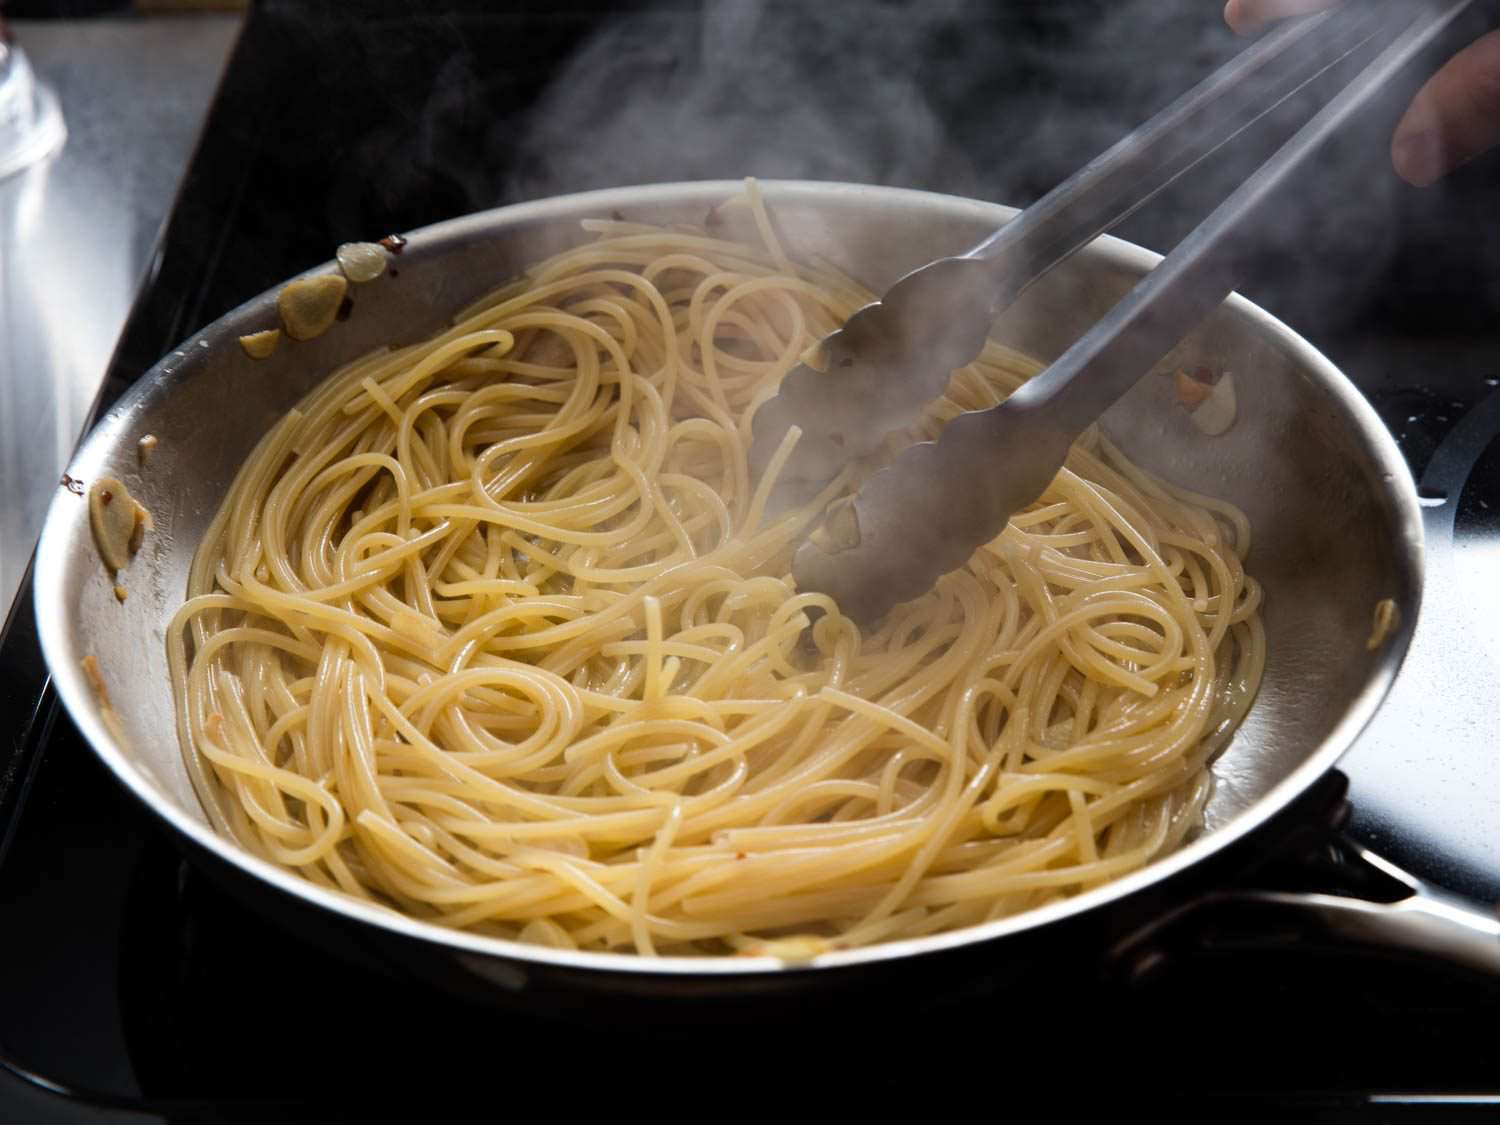 Spaghetti is finished in a skillet with some cooking water to make pasta aglio e olio.